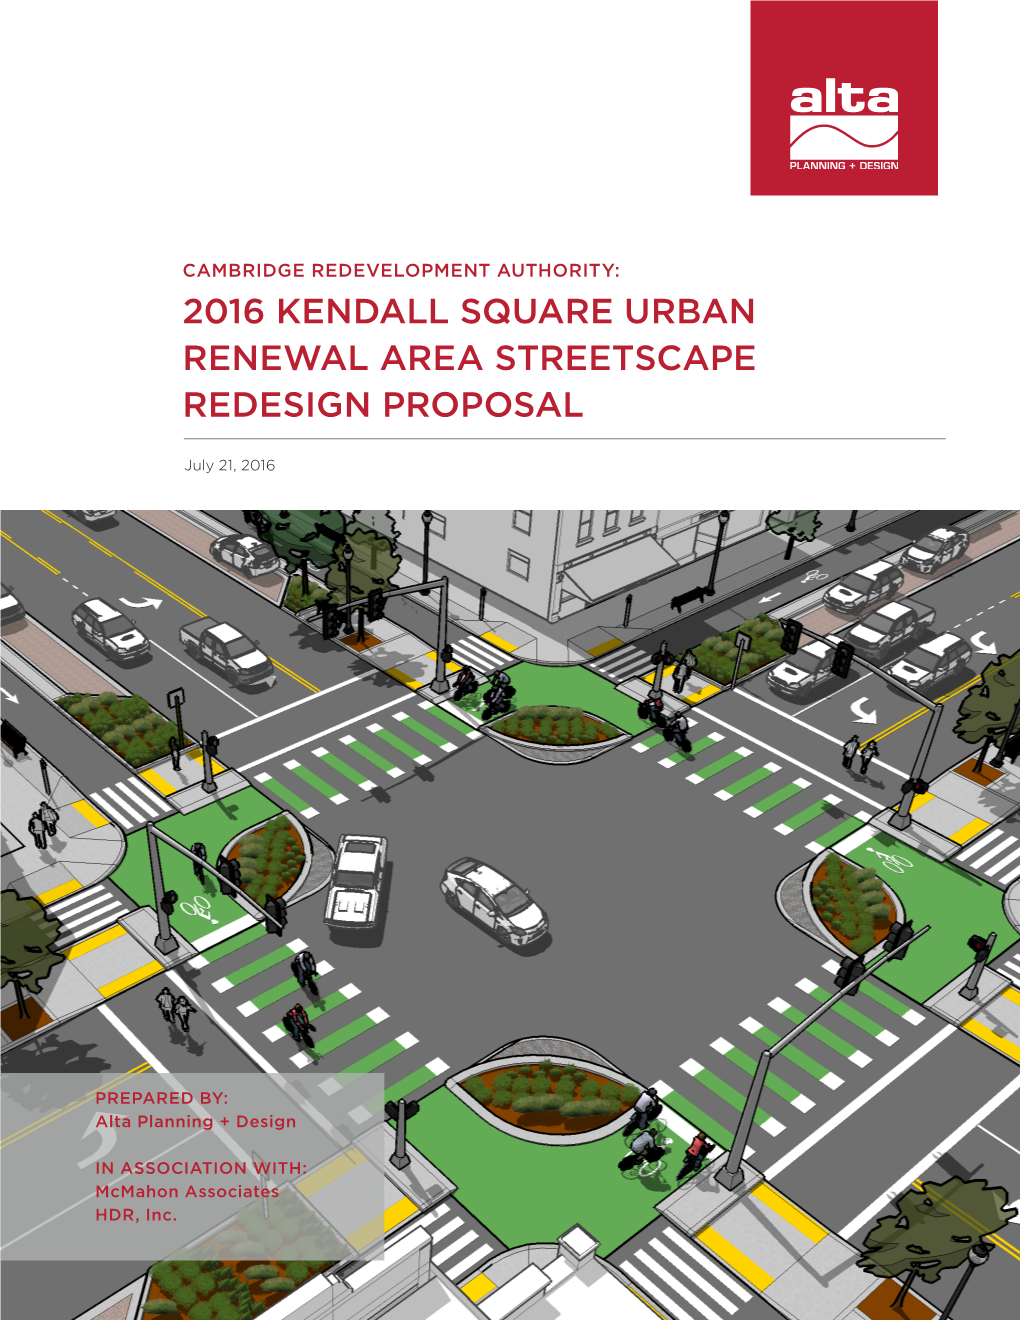 2016 Kendall Square Urban Renewal Area Streetscape Redesign Proposal